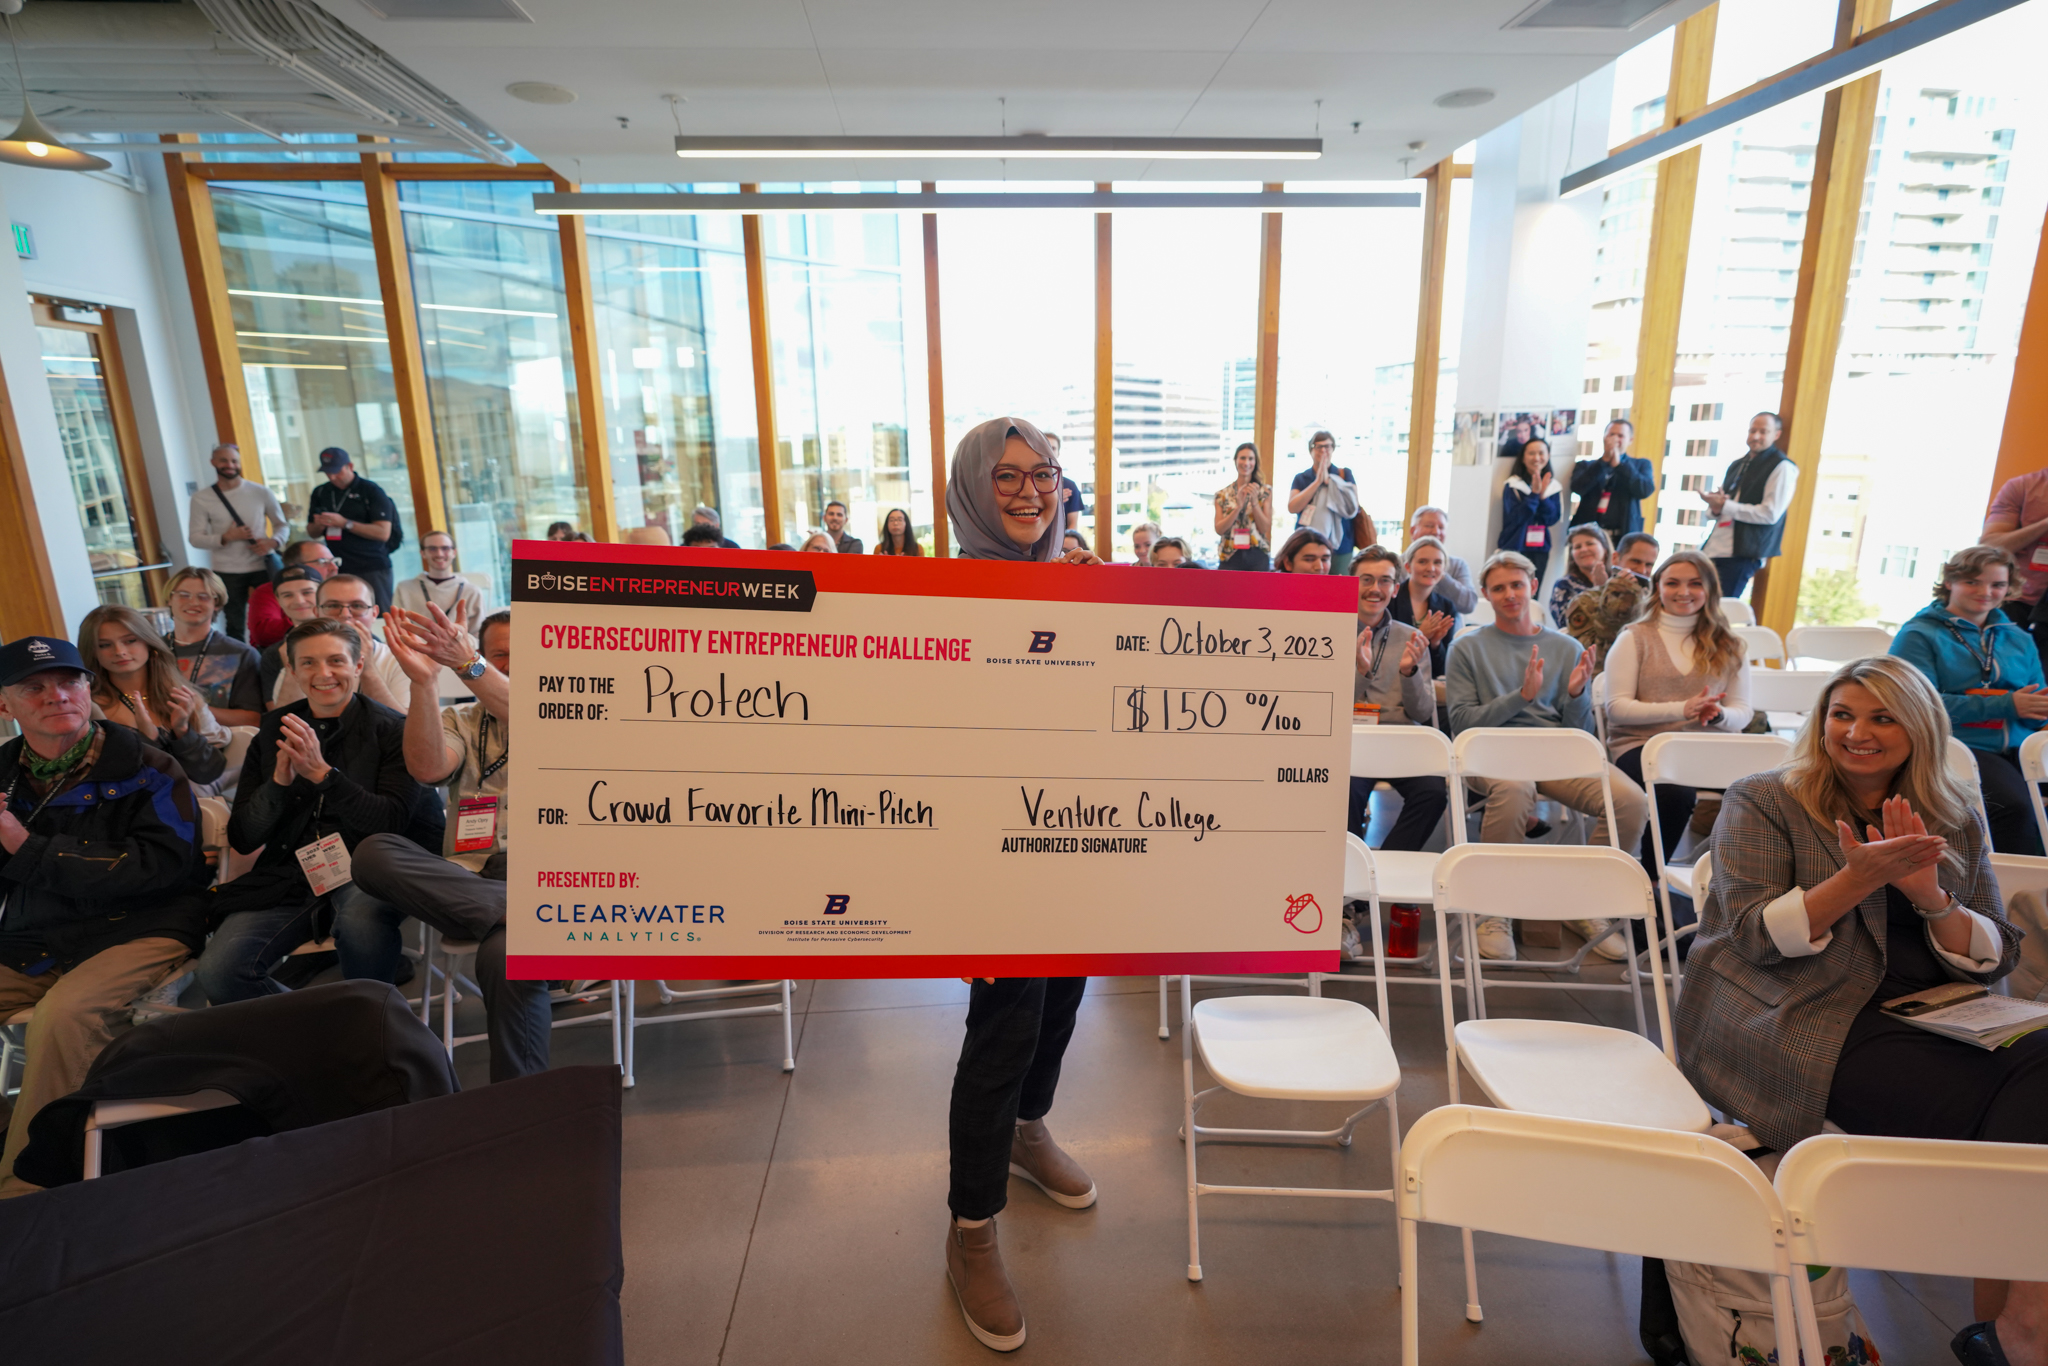 Cybersecurity Entrepreneur Challenge Winner 2023, Olima, with Check in front of Crowd